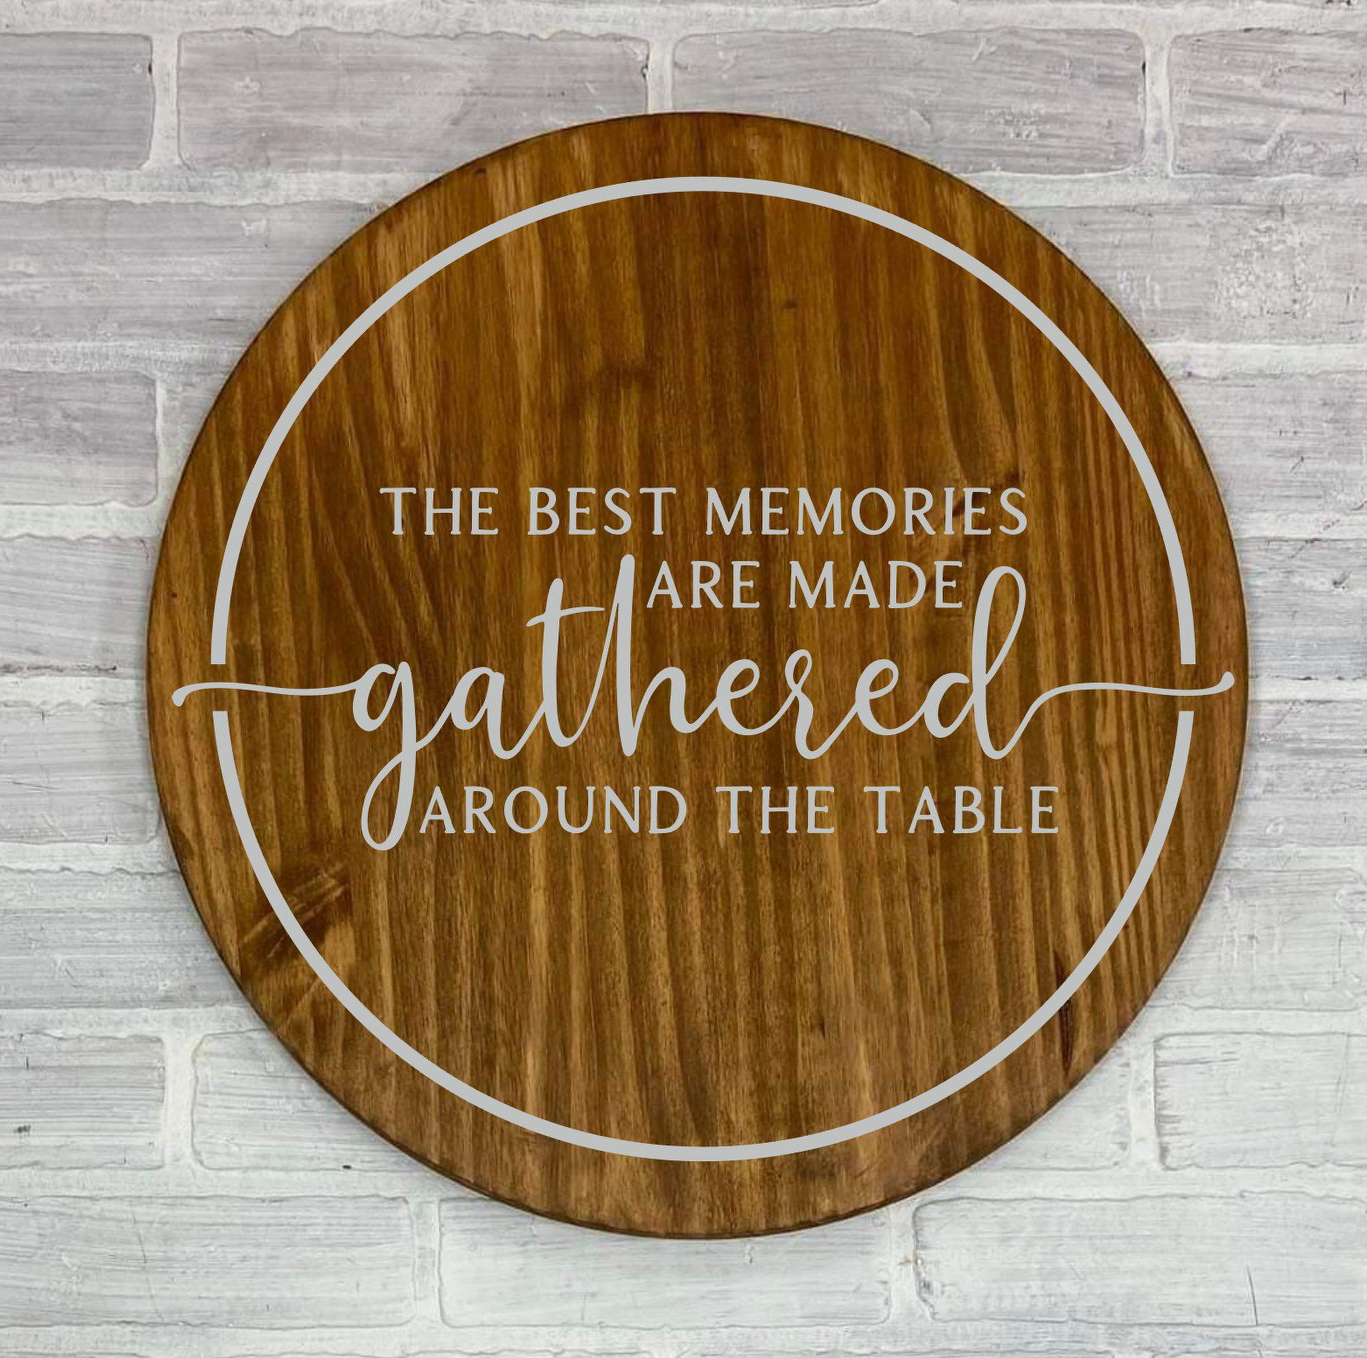 The Best Memories are Made Gathered around the table: ROUND DESIGN - Paisley Grace Makery